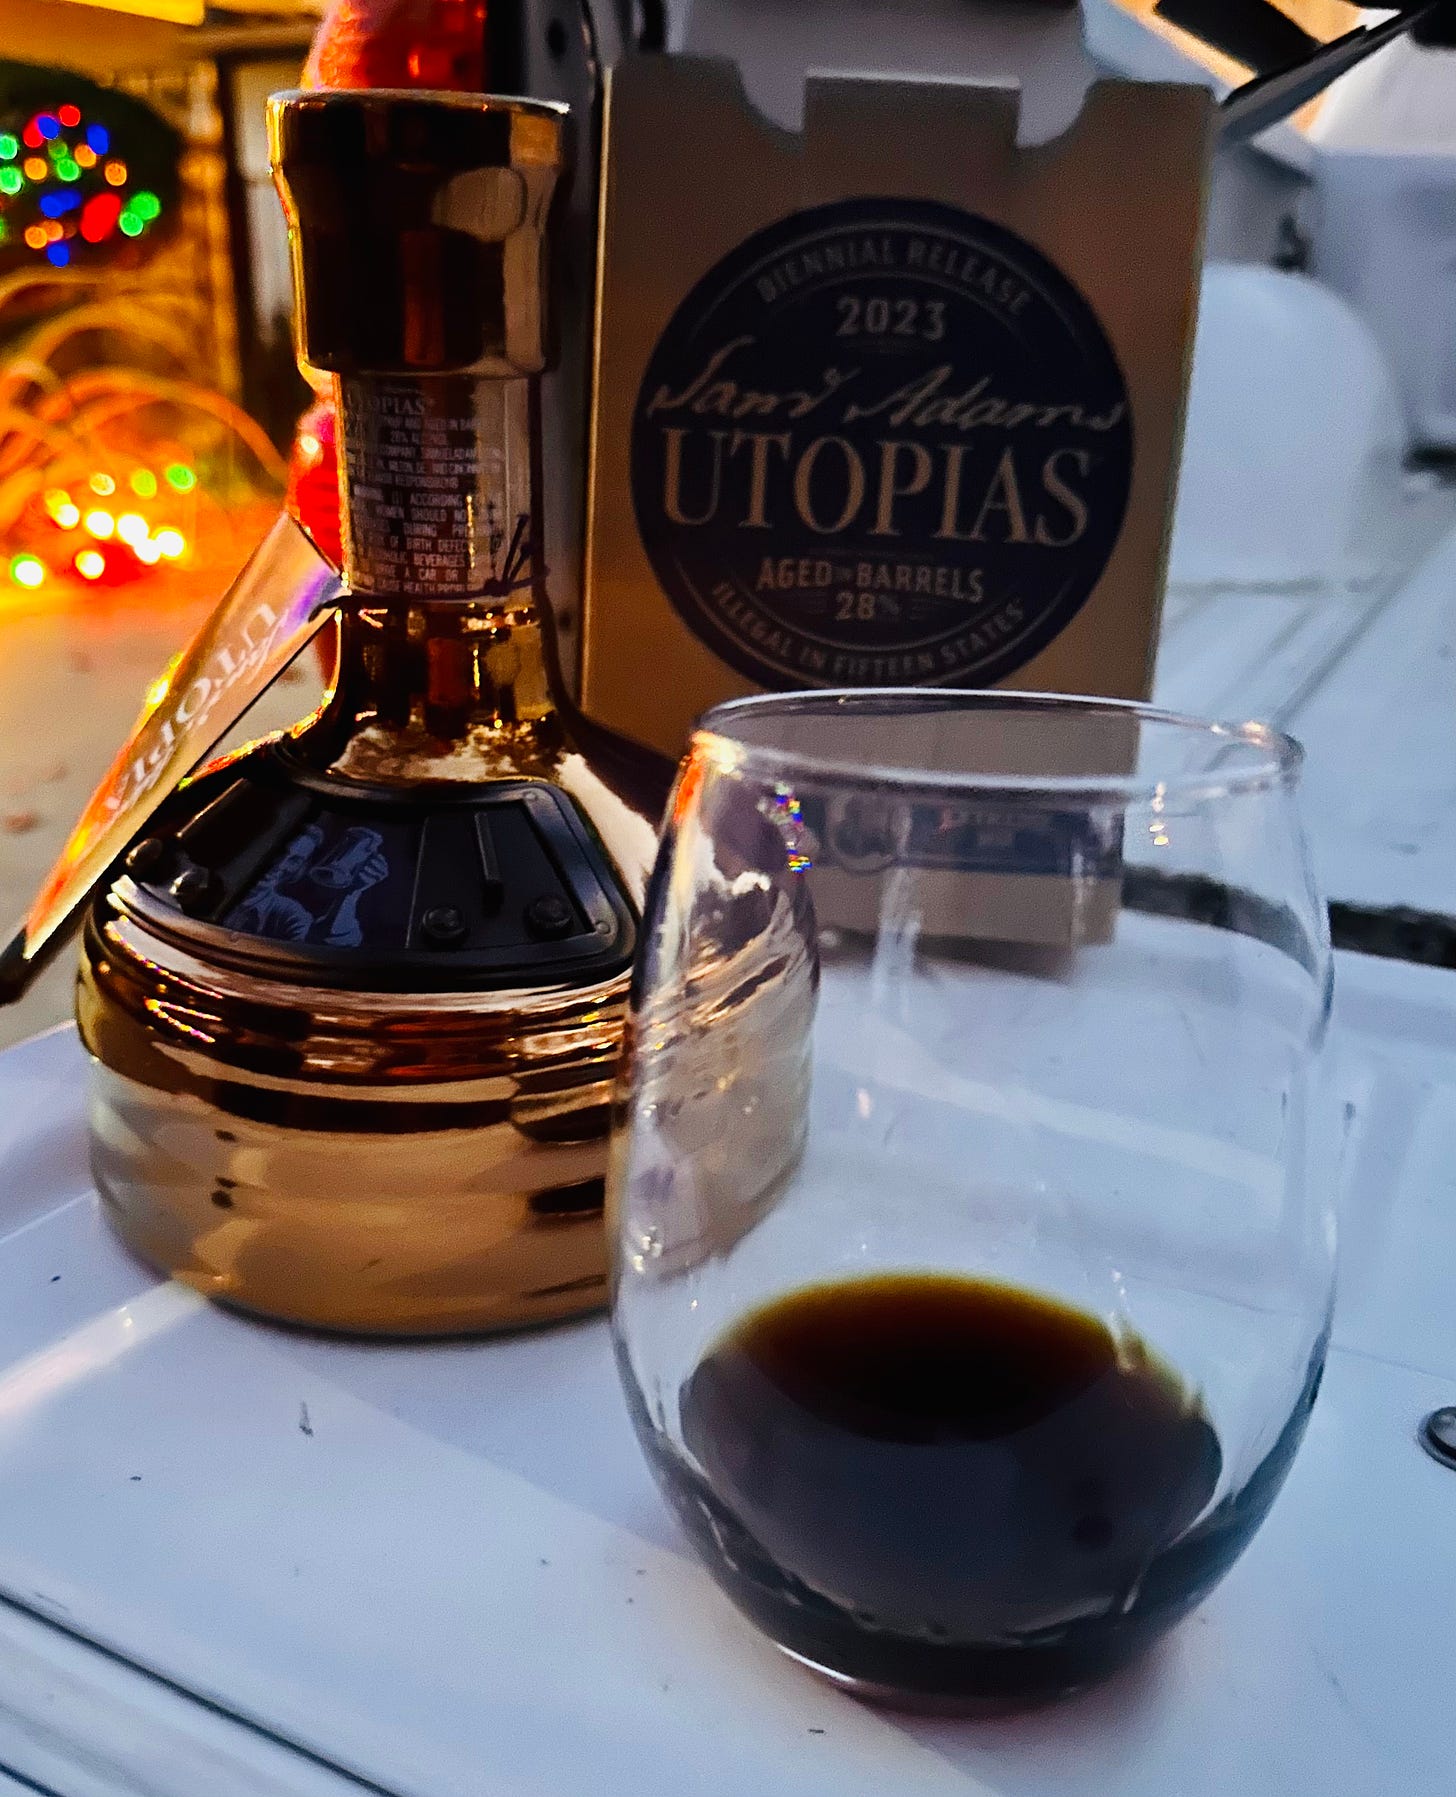 A bottle of Sam Adam's Untopias sitting next to a Utopias box and a glass of the beer sitting on a pickup truck tailgate